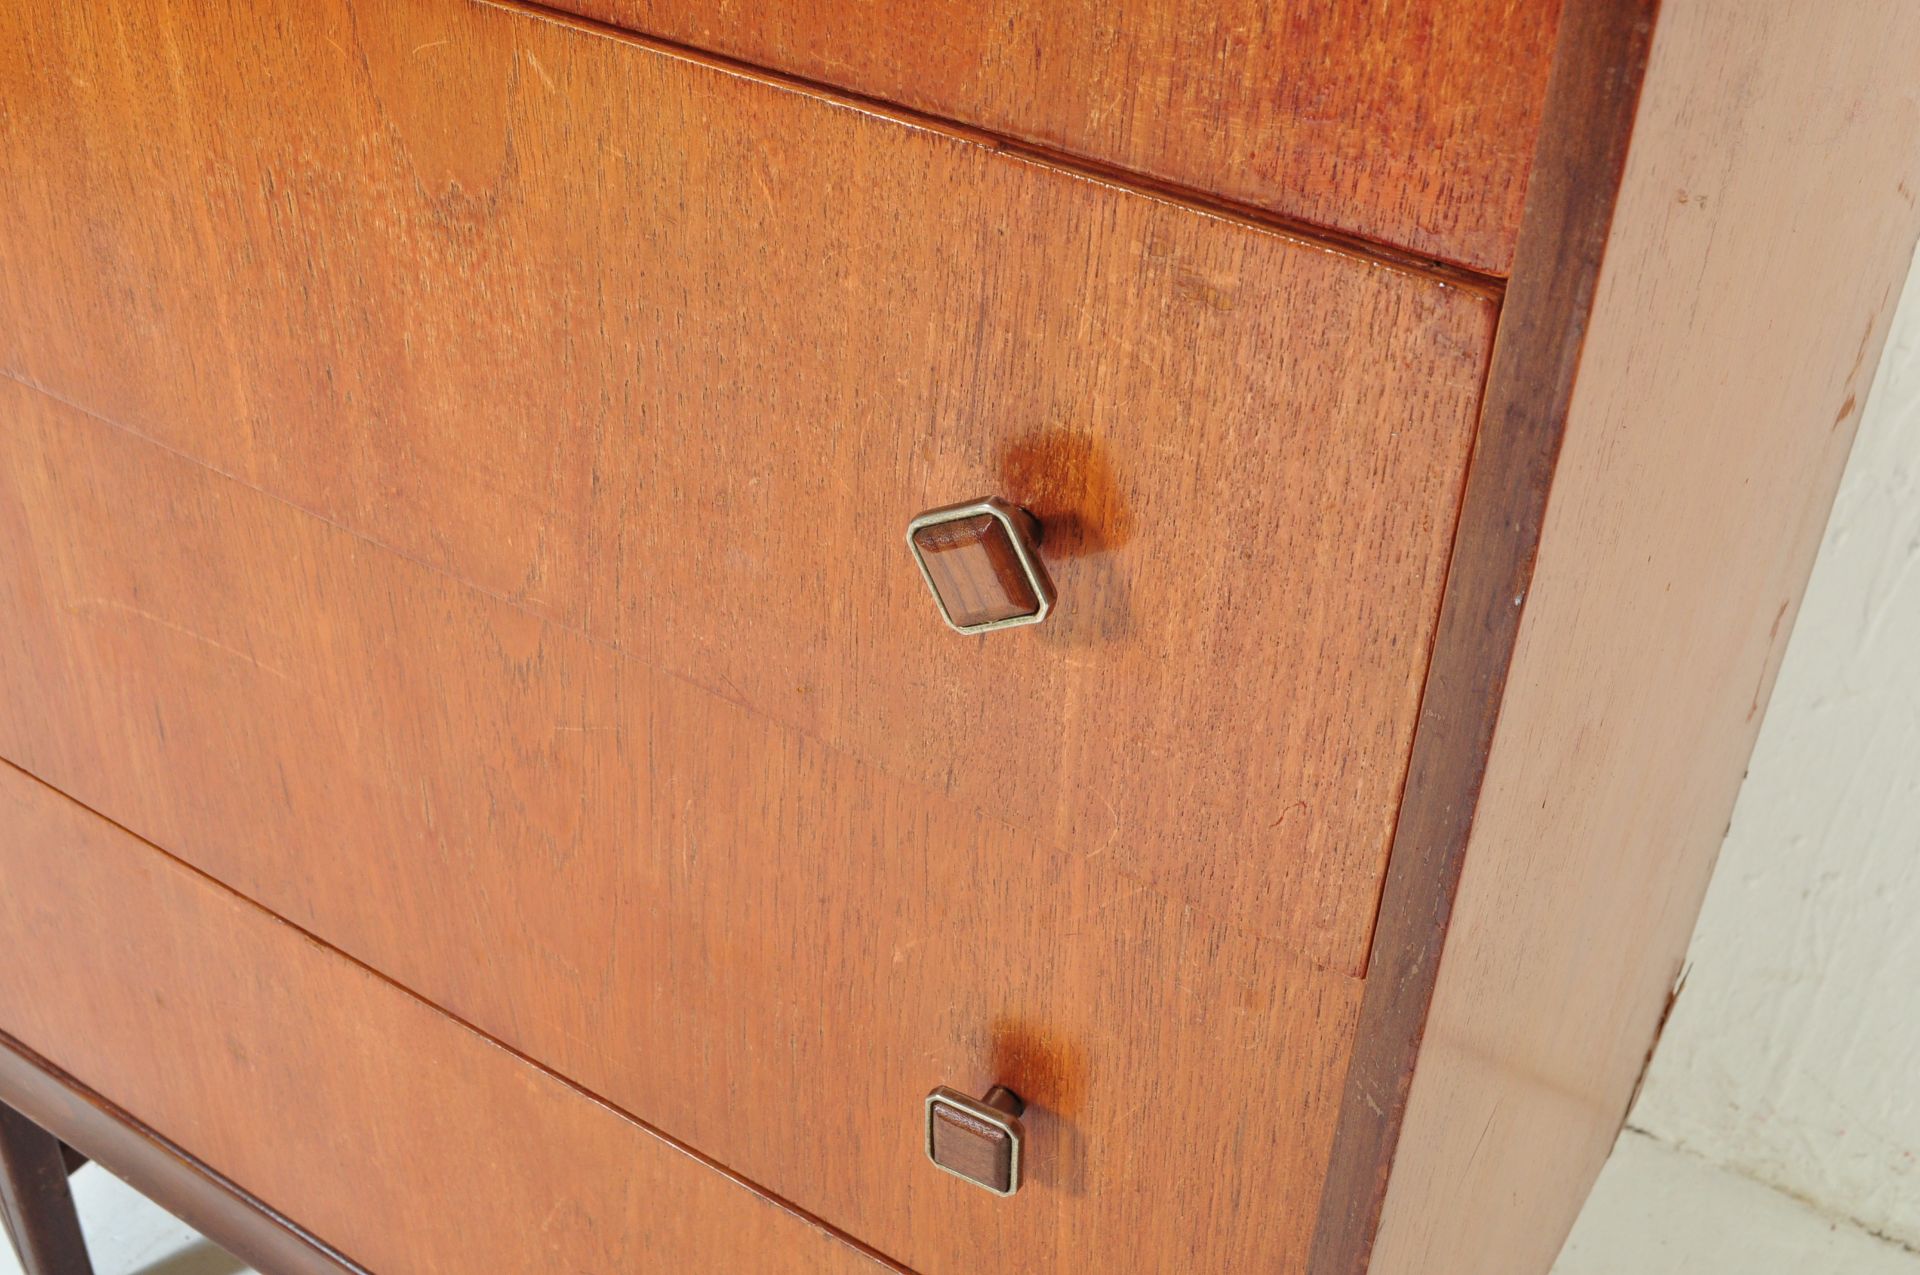 MID 20TH CENTURY TEAK CHEST OF DRAWERS - Image 5 of 5